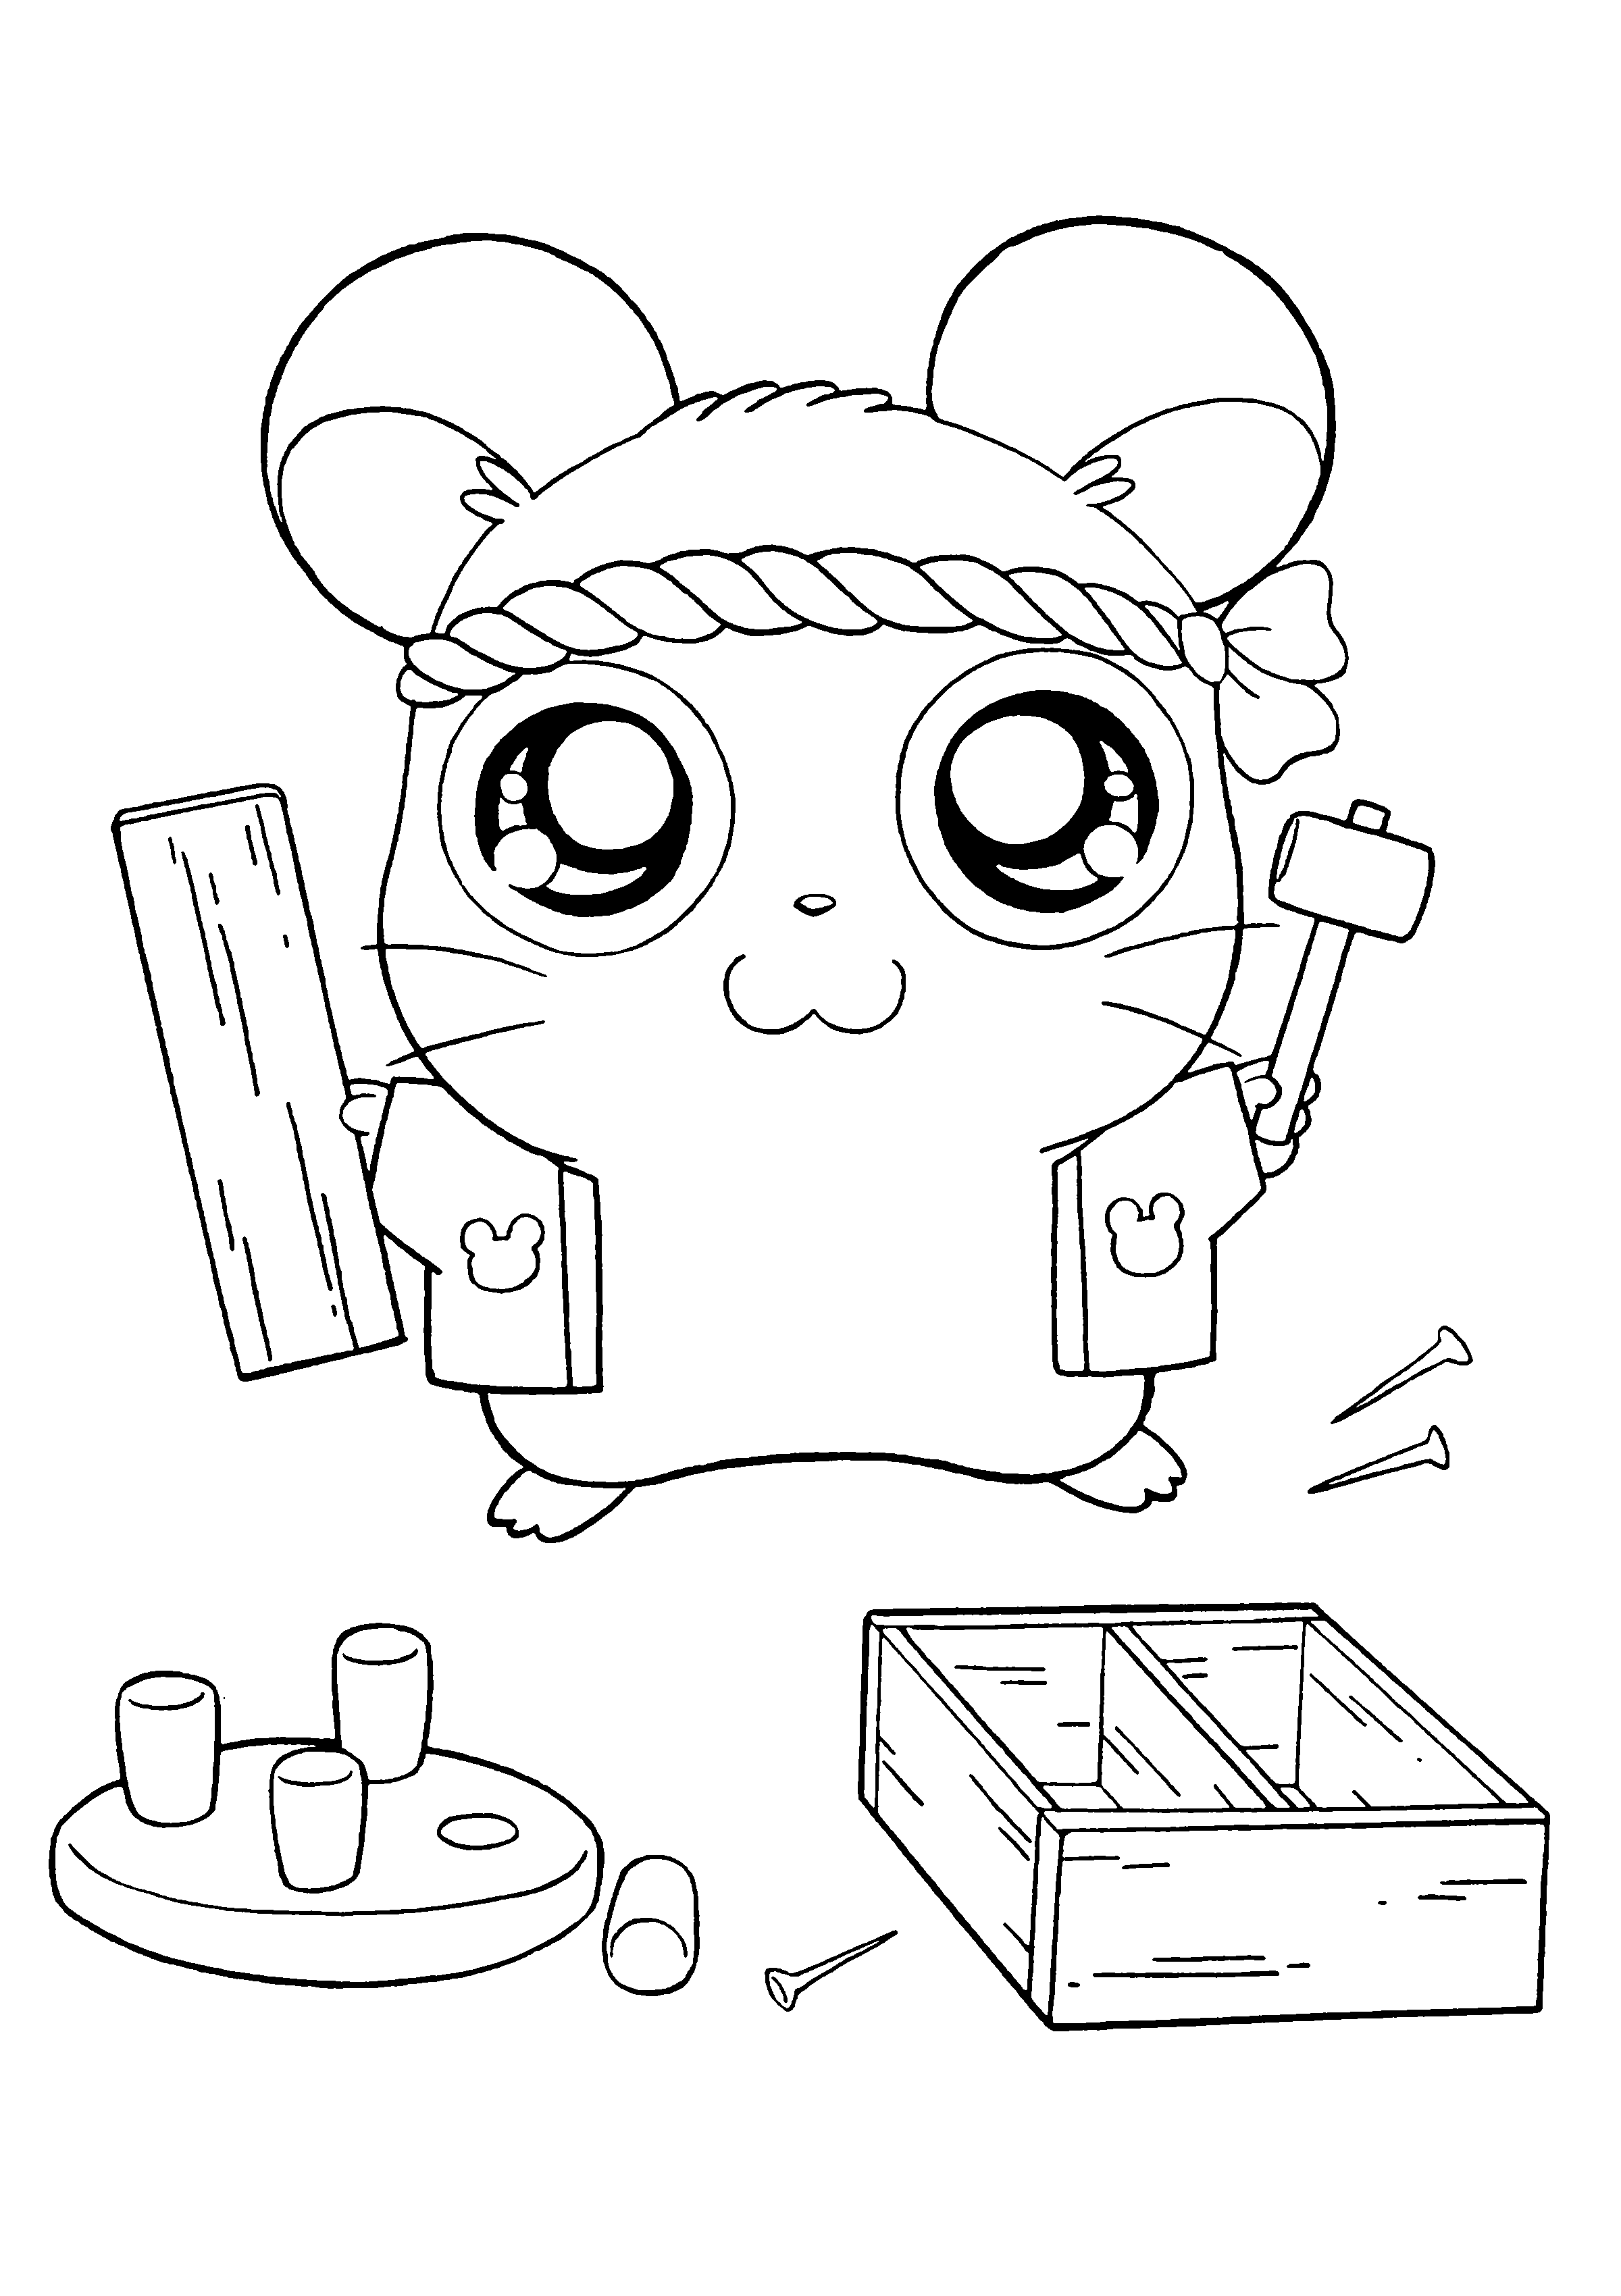 Hamtaro coloring pages